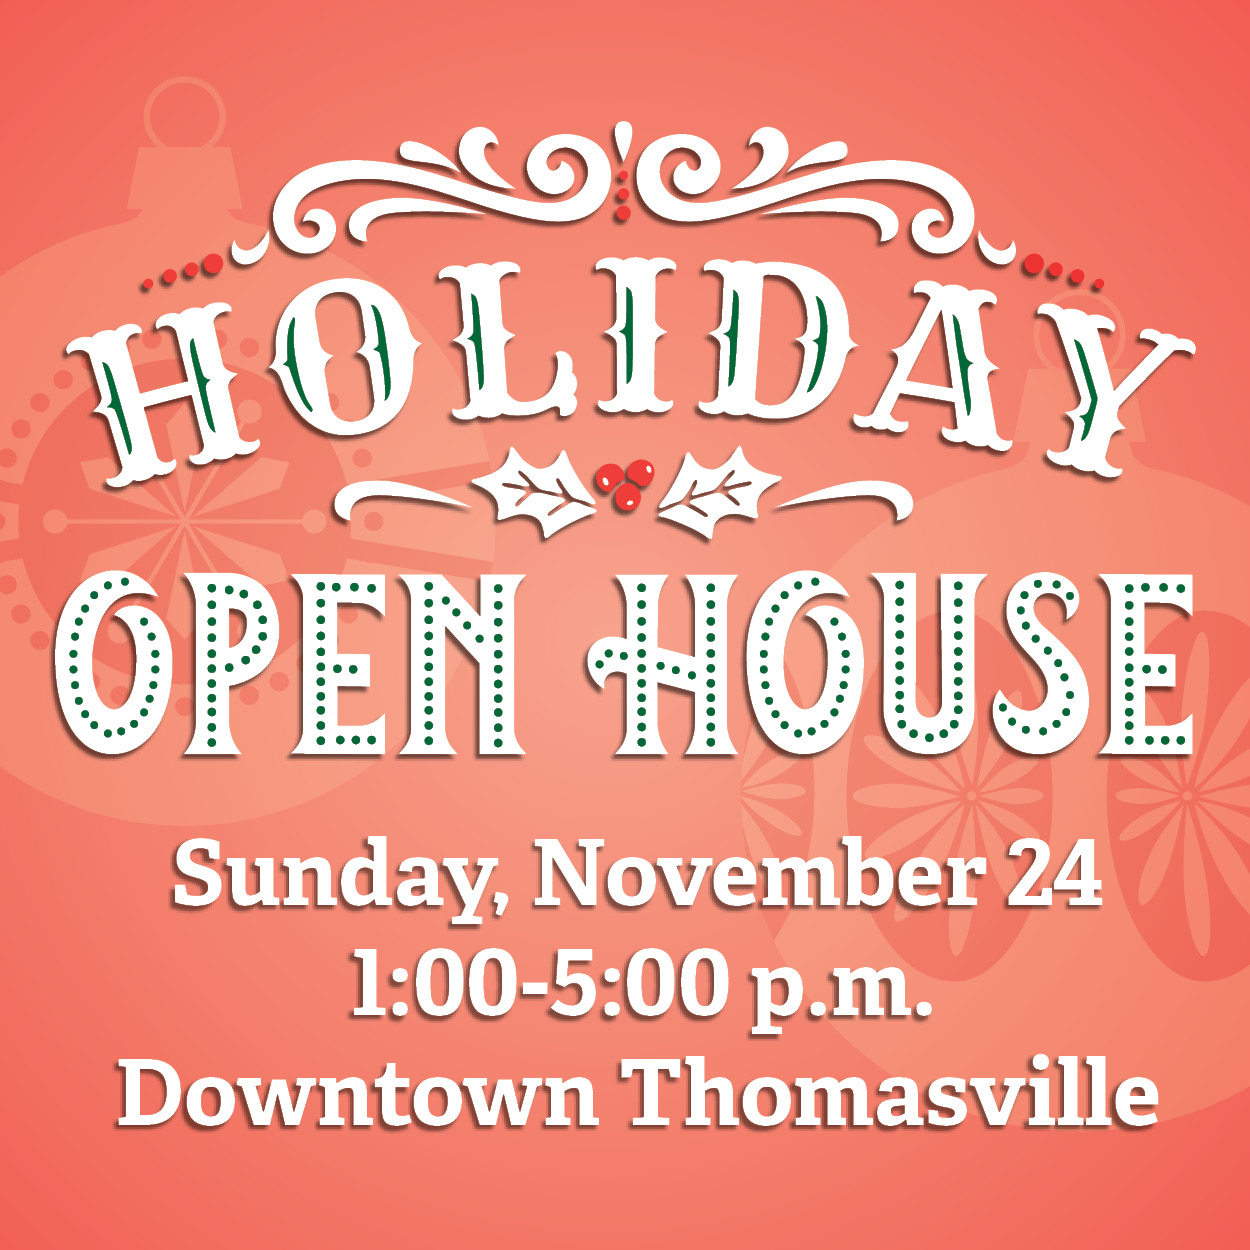 Photo for HOLIDAY OPEN HOUSE IN DOWNTOWN THOMASVILLE